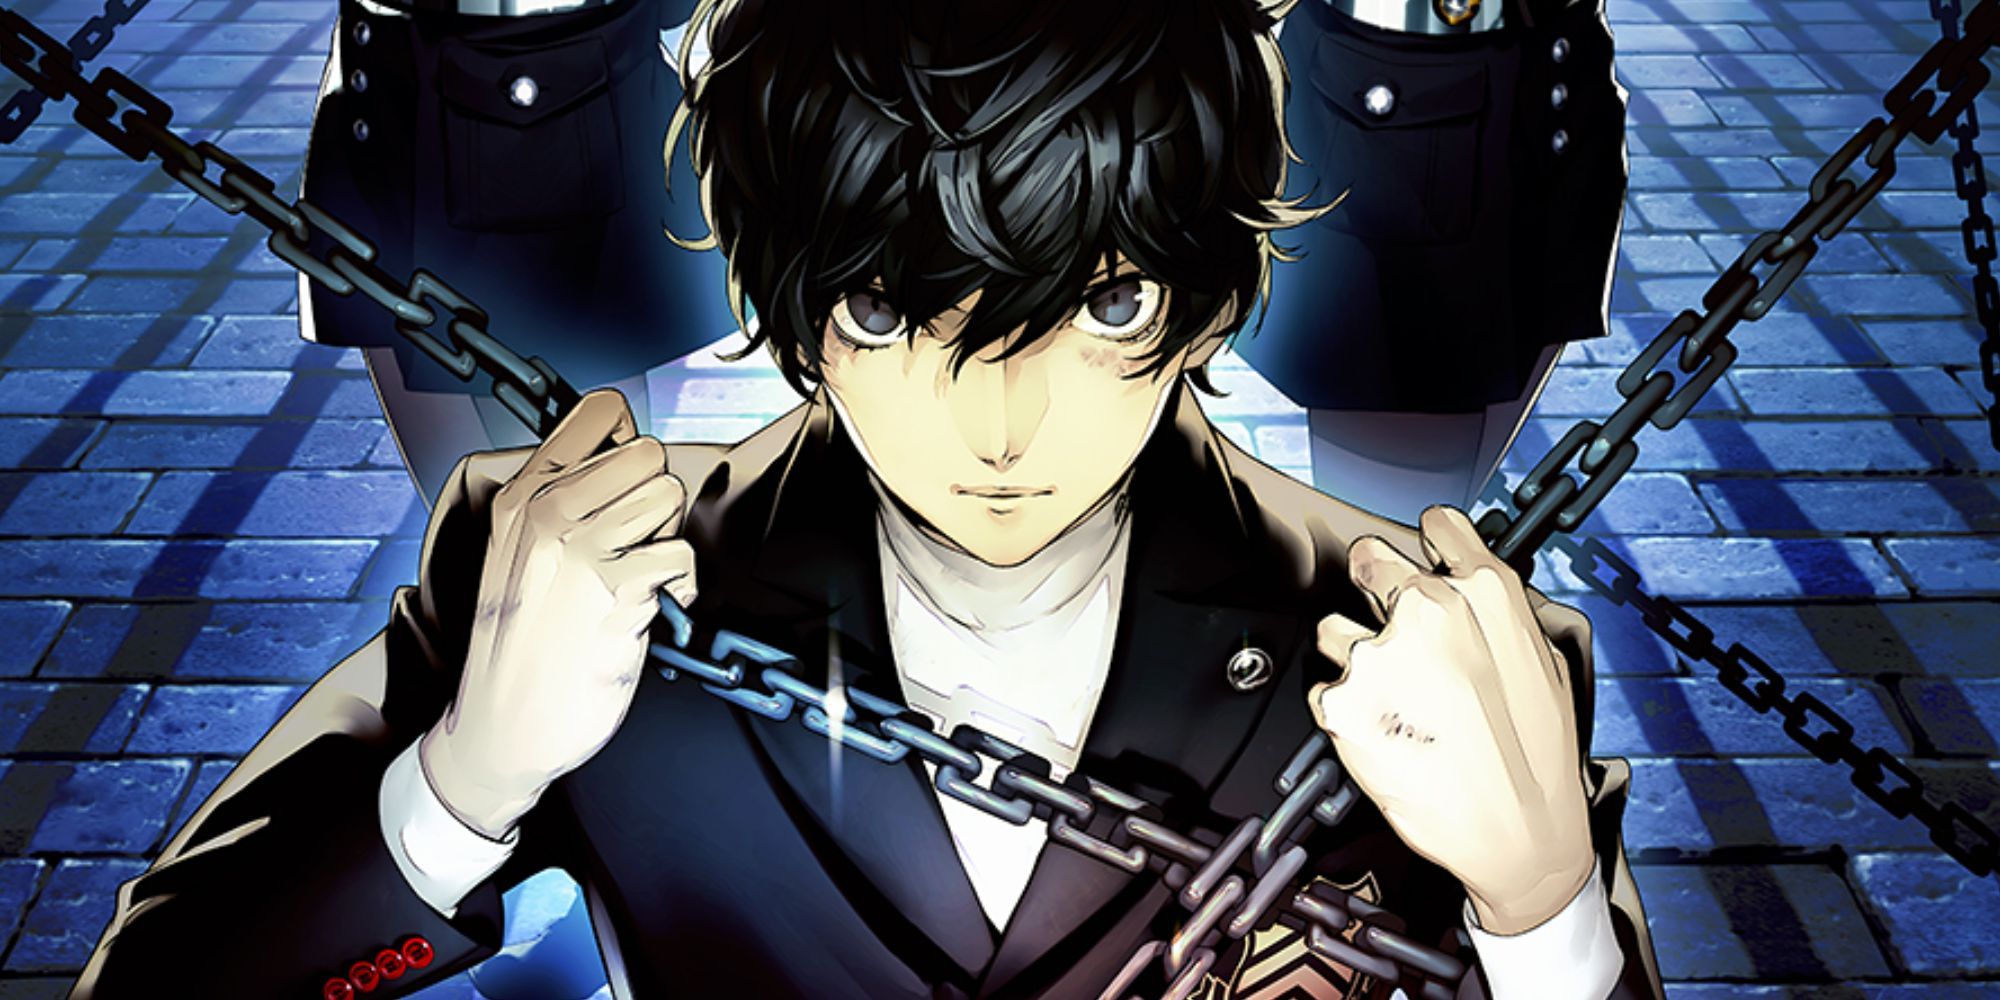 Persona 5 Joker Trapped with the Chains of Fate in The Velvet Room in front of Justine and Caroline